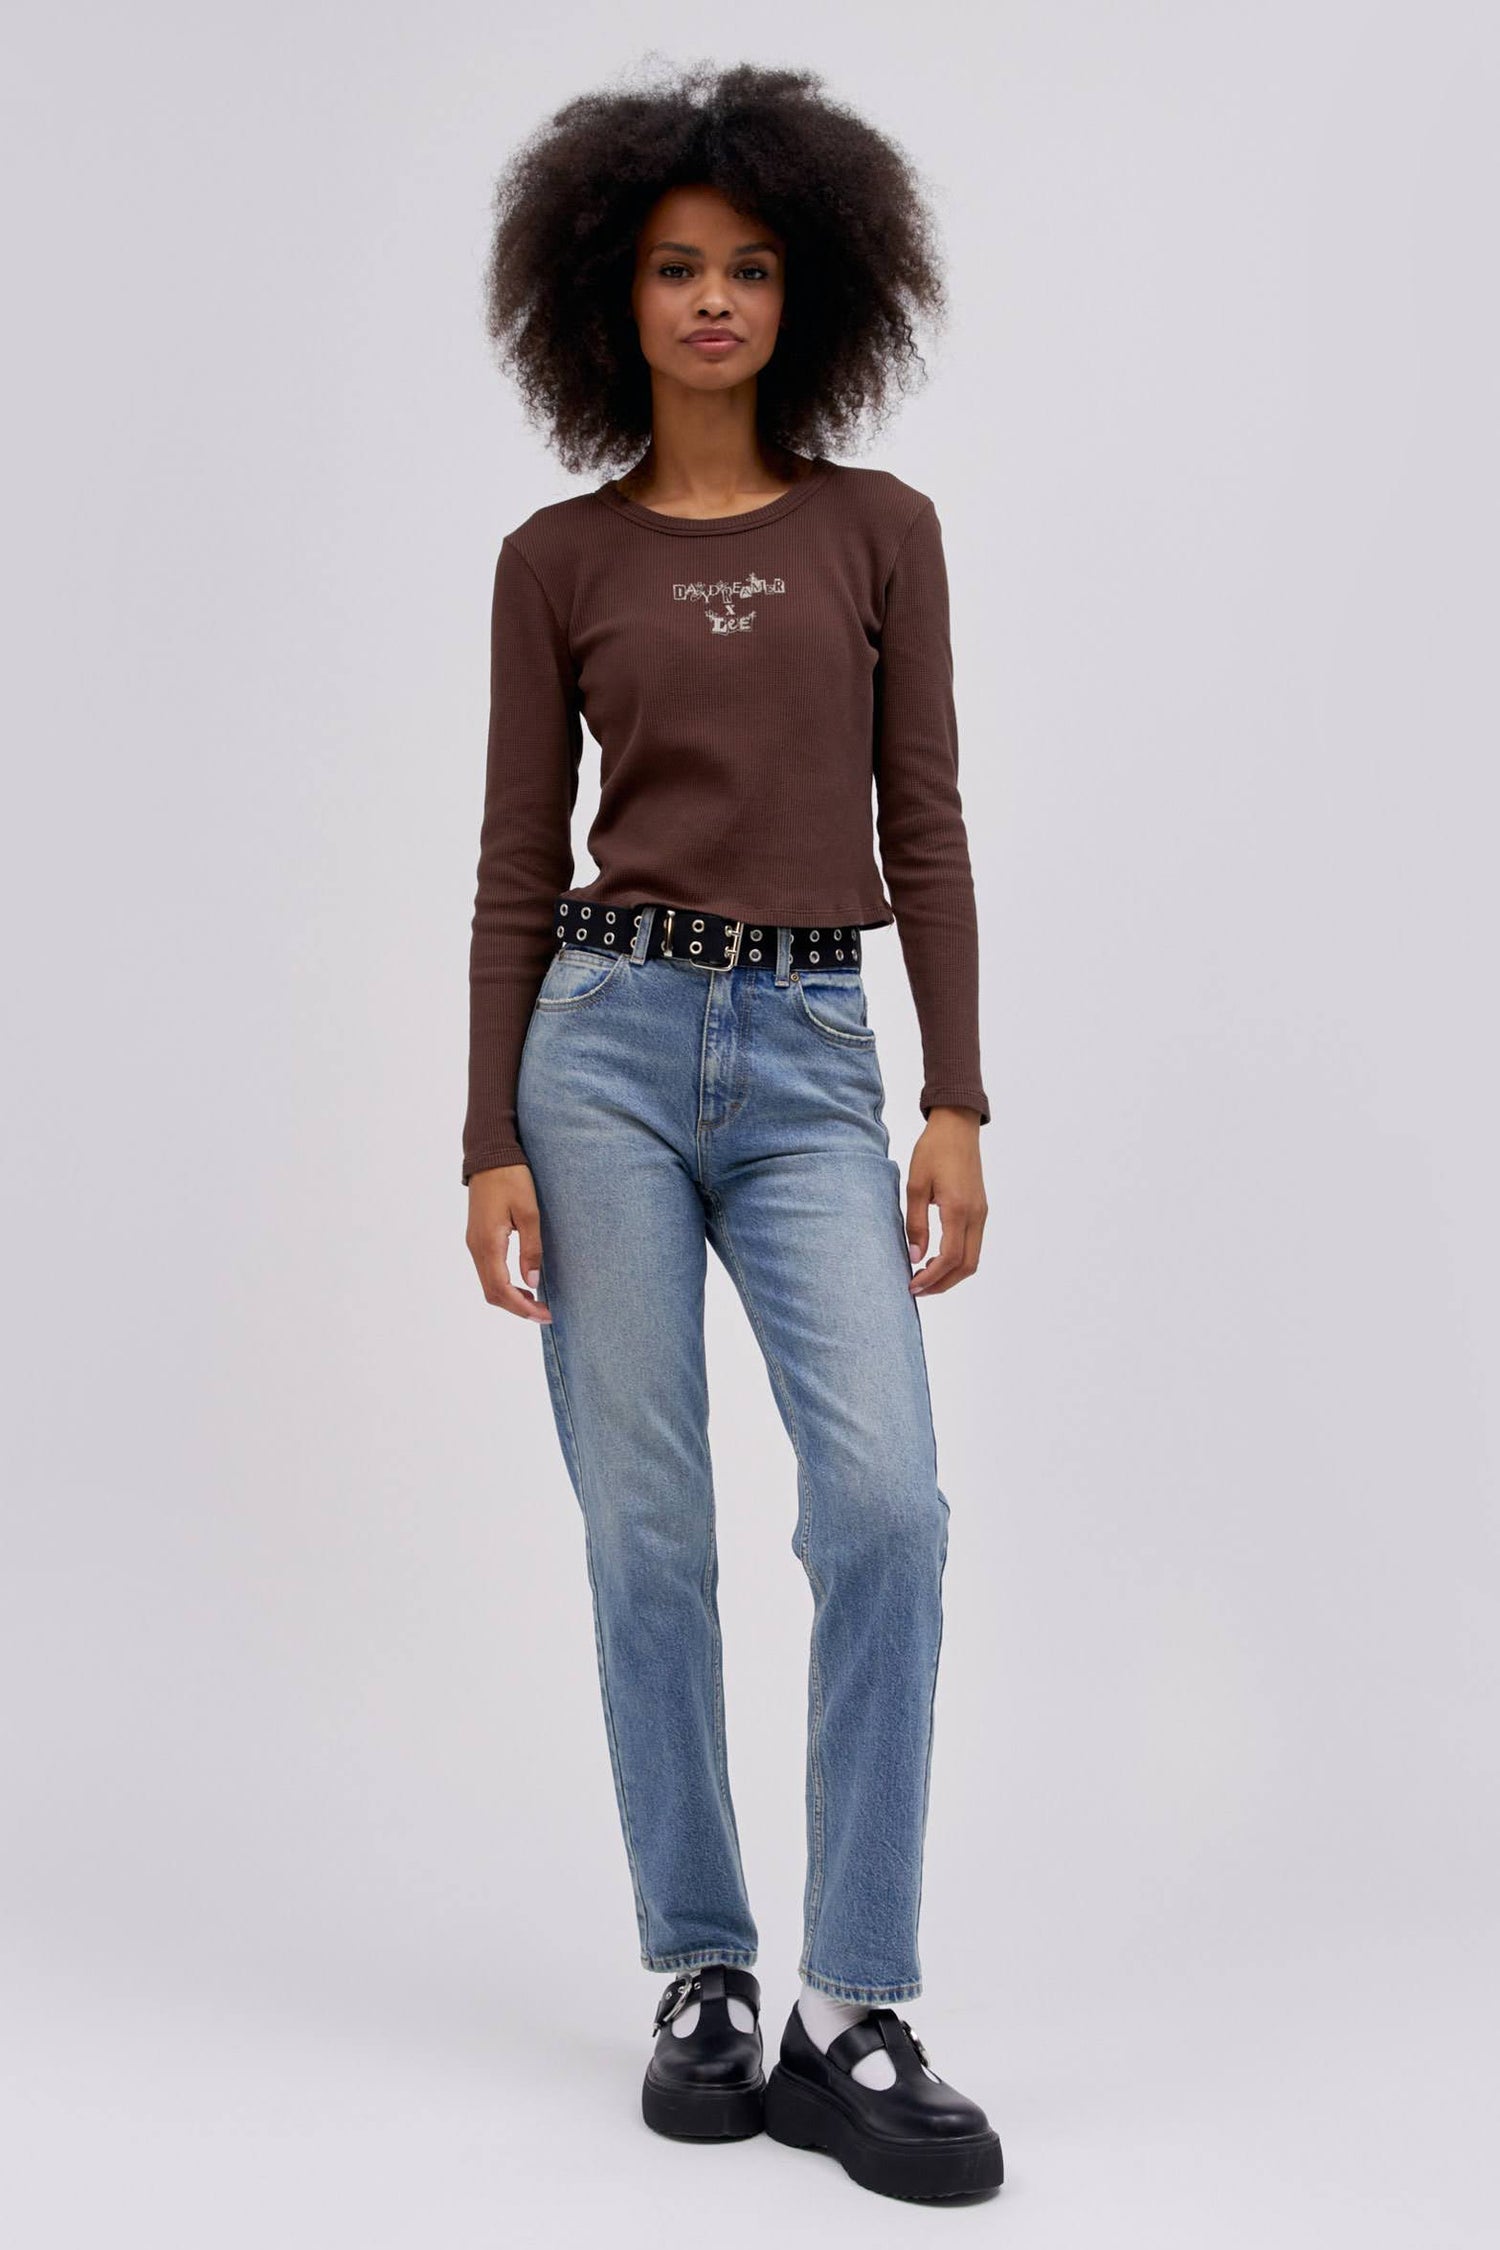 A curly-haired model featuring a dark brown classic lightweight thermal with a mid storm colored high rise and straight-legged jeans with a slim fit through the hips.